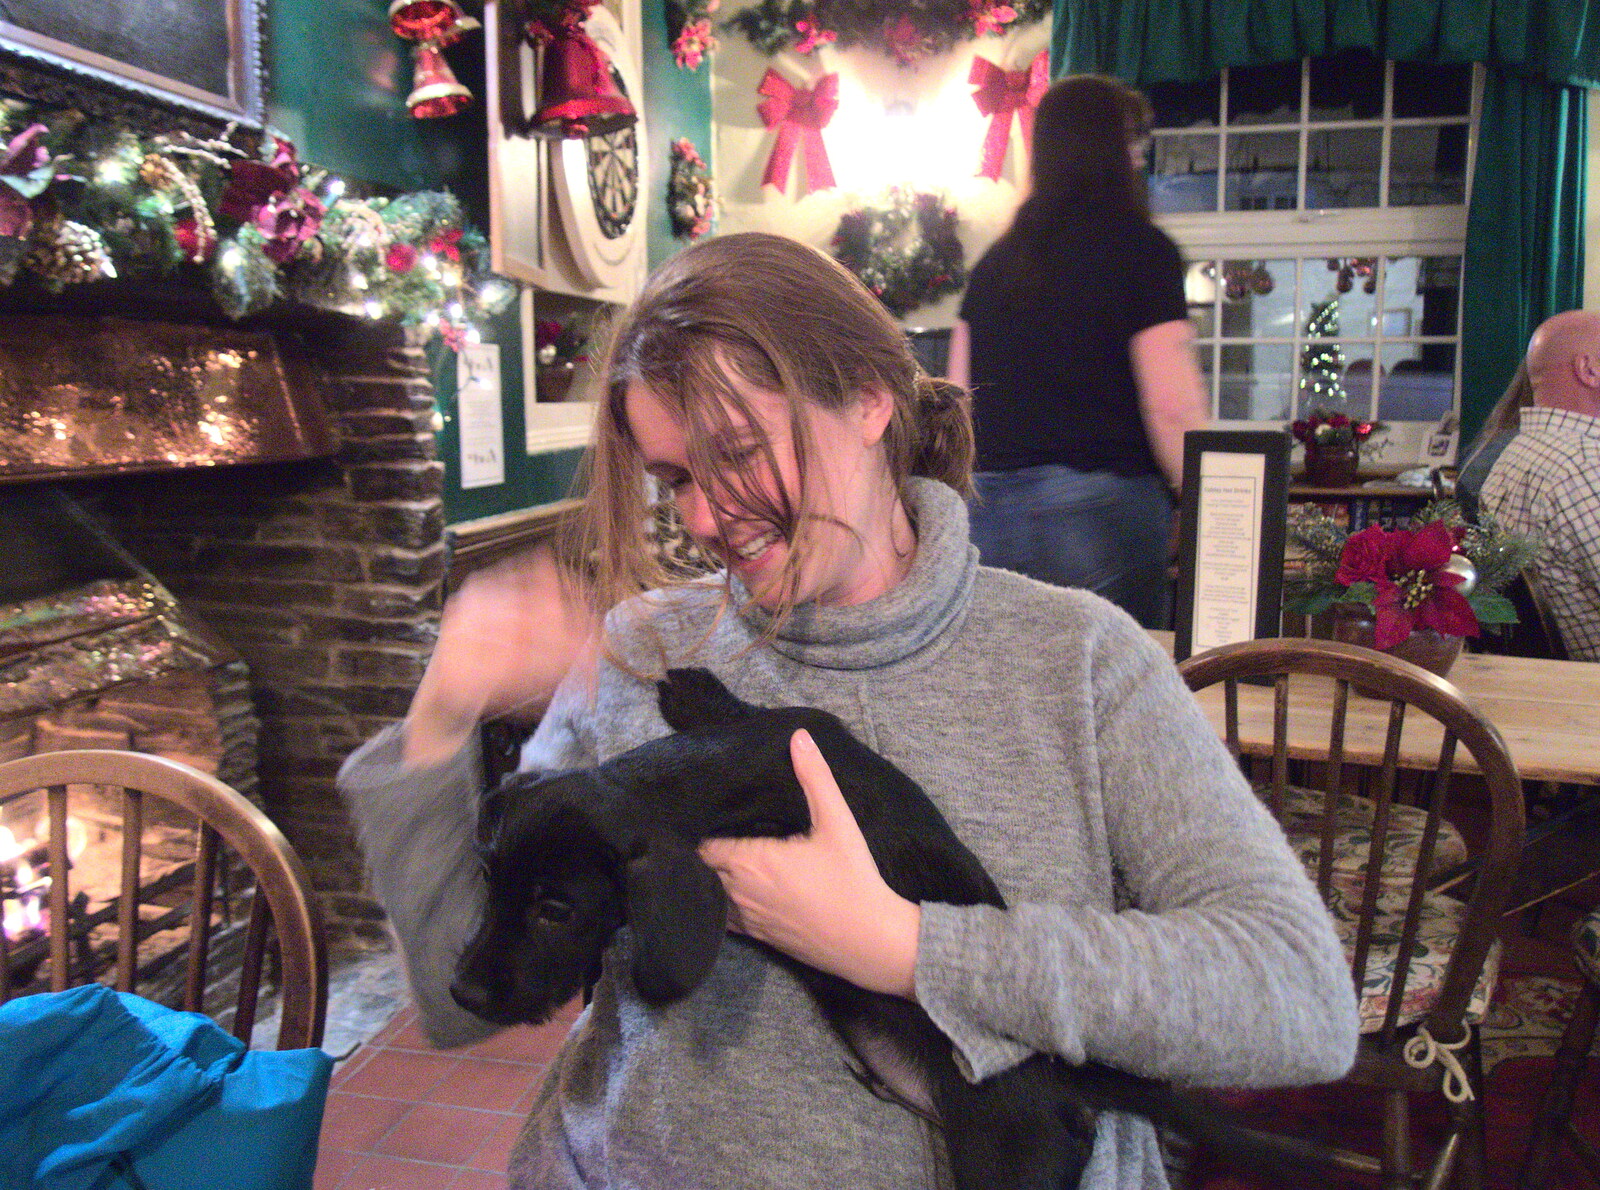 Isobel and a wriggly puppy from Killerton House, Broadclyst, Devon - 30th December 2017